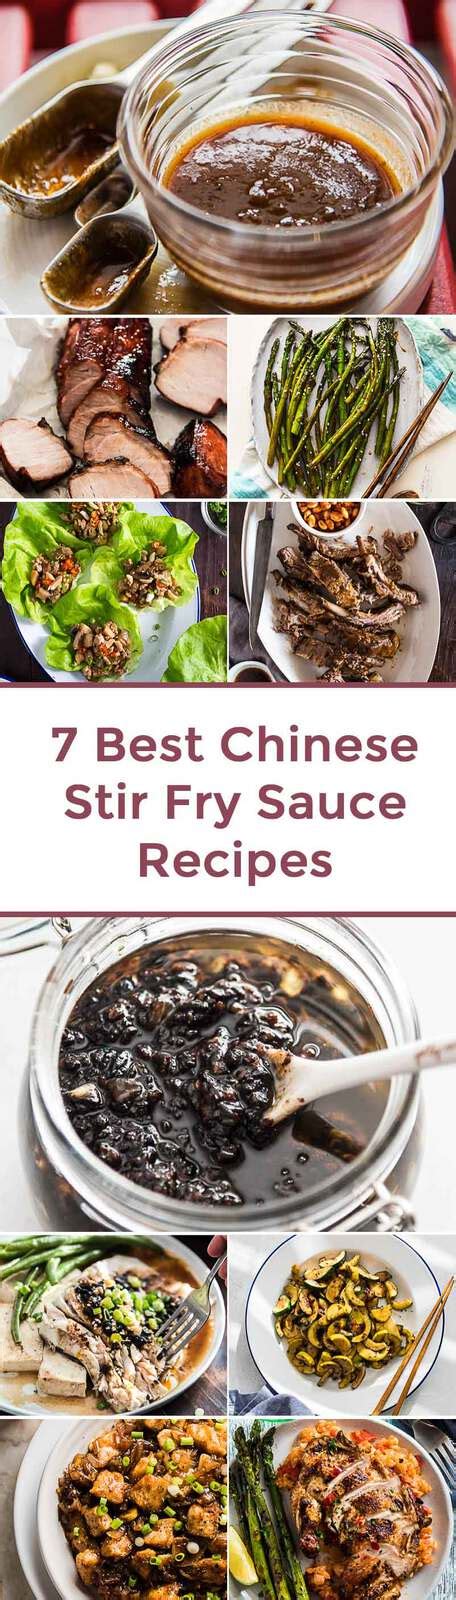 Stir fry your vegetables and meat as desired, add appropriate amount of sauce, bring to a boil, boil for 1 minute or until slightly. 7 Best Chinese Stir Fry Sauce Recipes | Omnivore's Cookbook